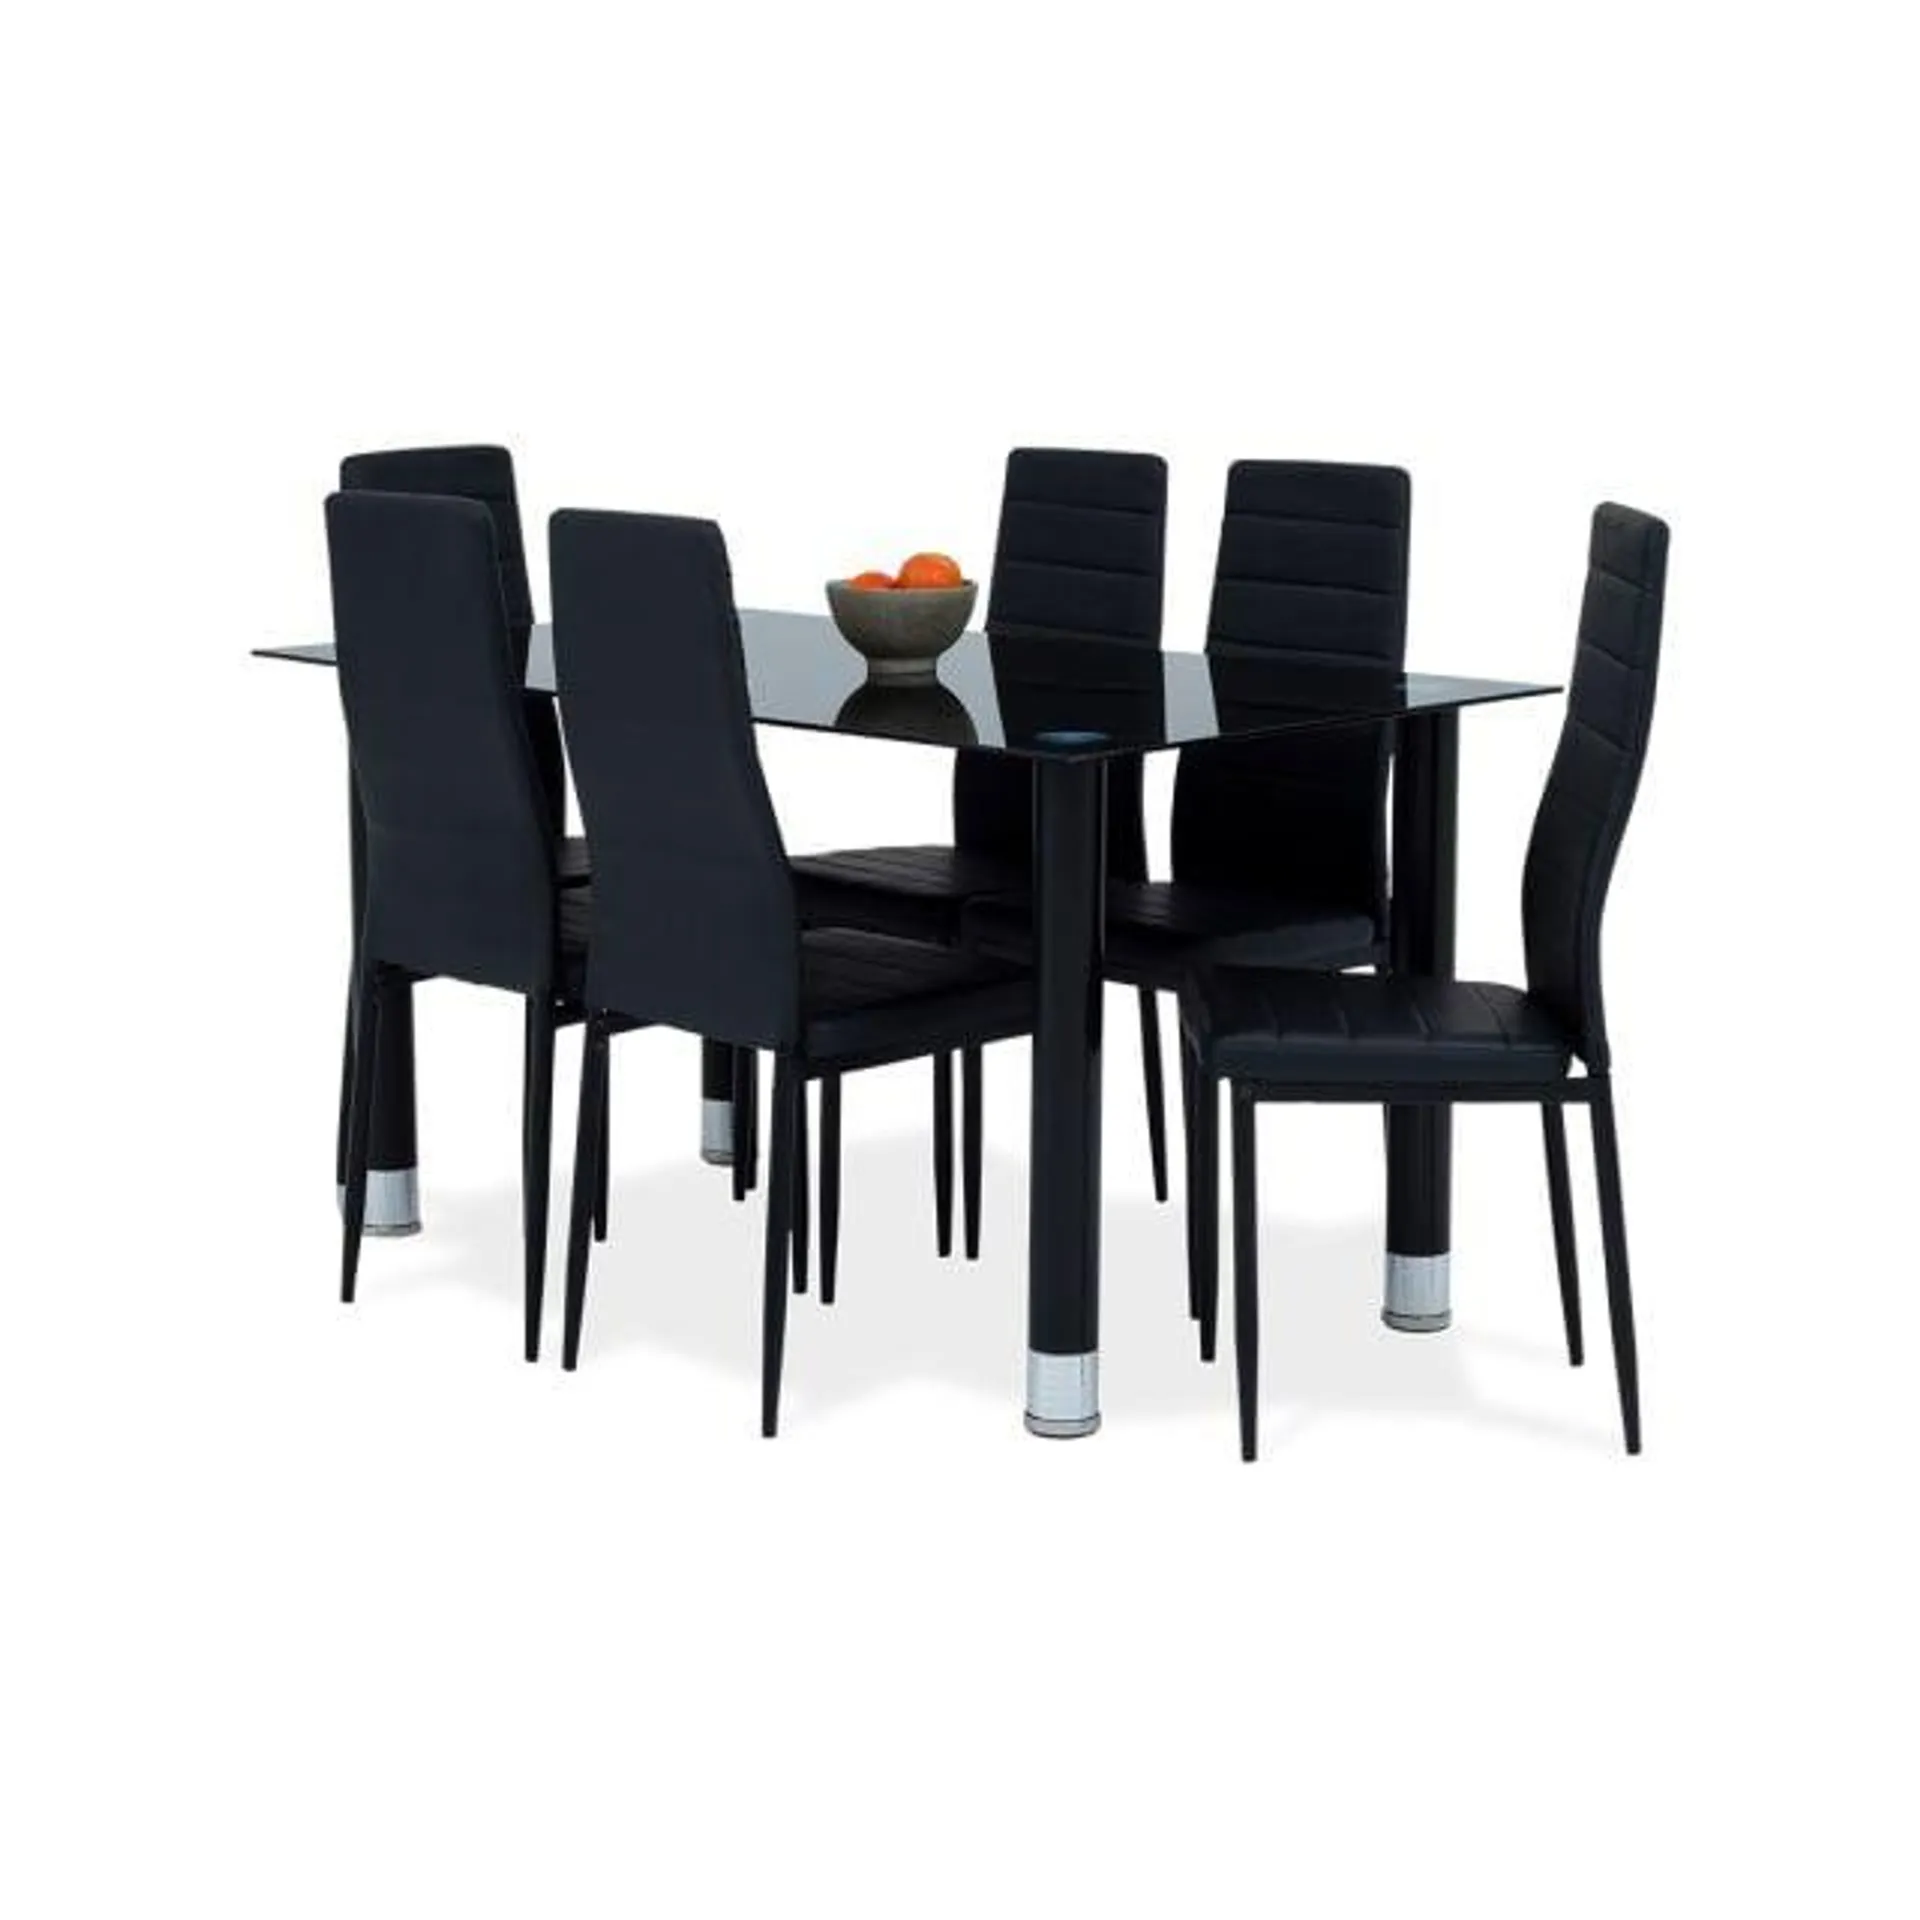 Avatar 6-Seater Dining Room Table and Chairs